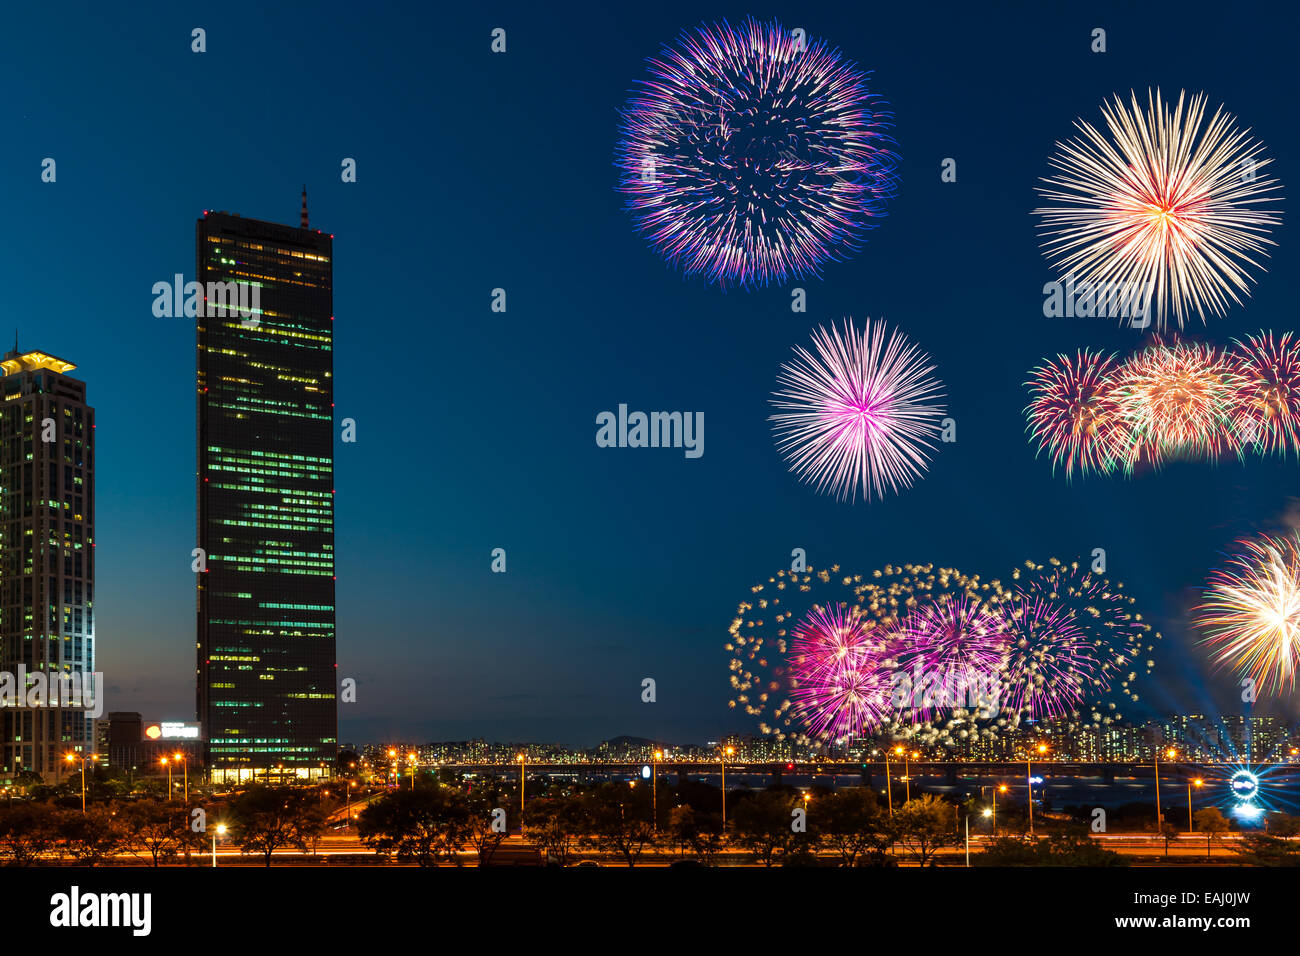 Fireworks explode over the Han River during the annual Seoul Fireworks Festival in Seoul, South Korea. Stock Photo